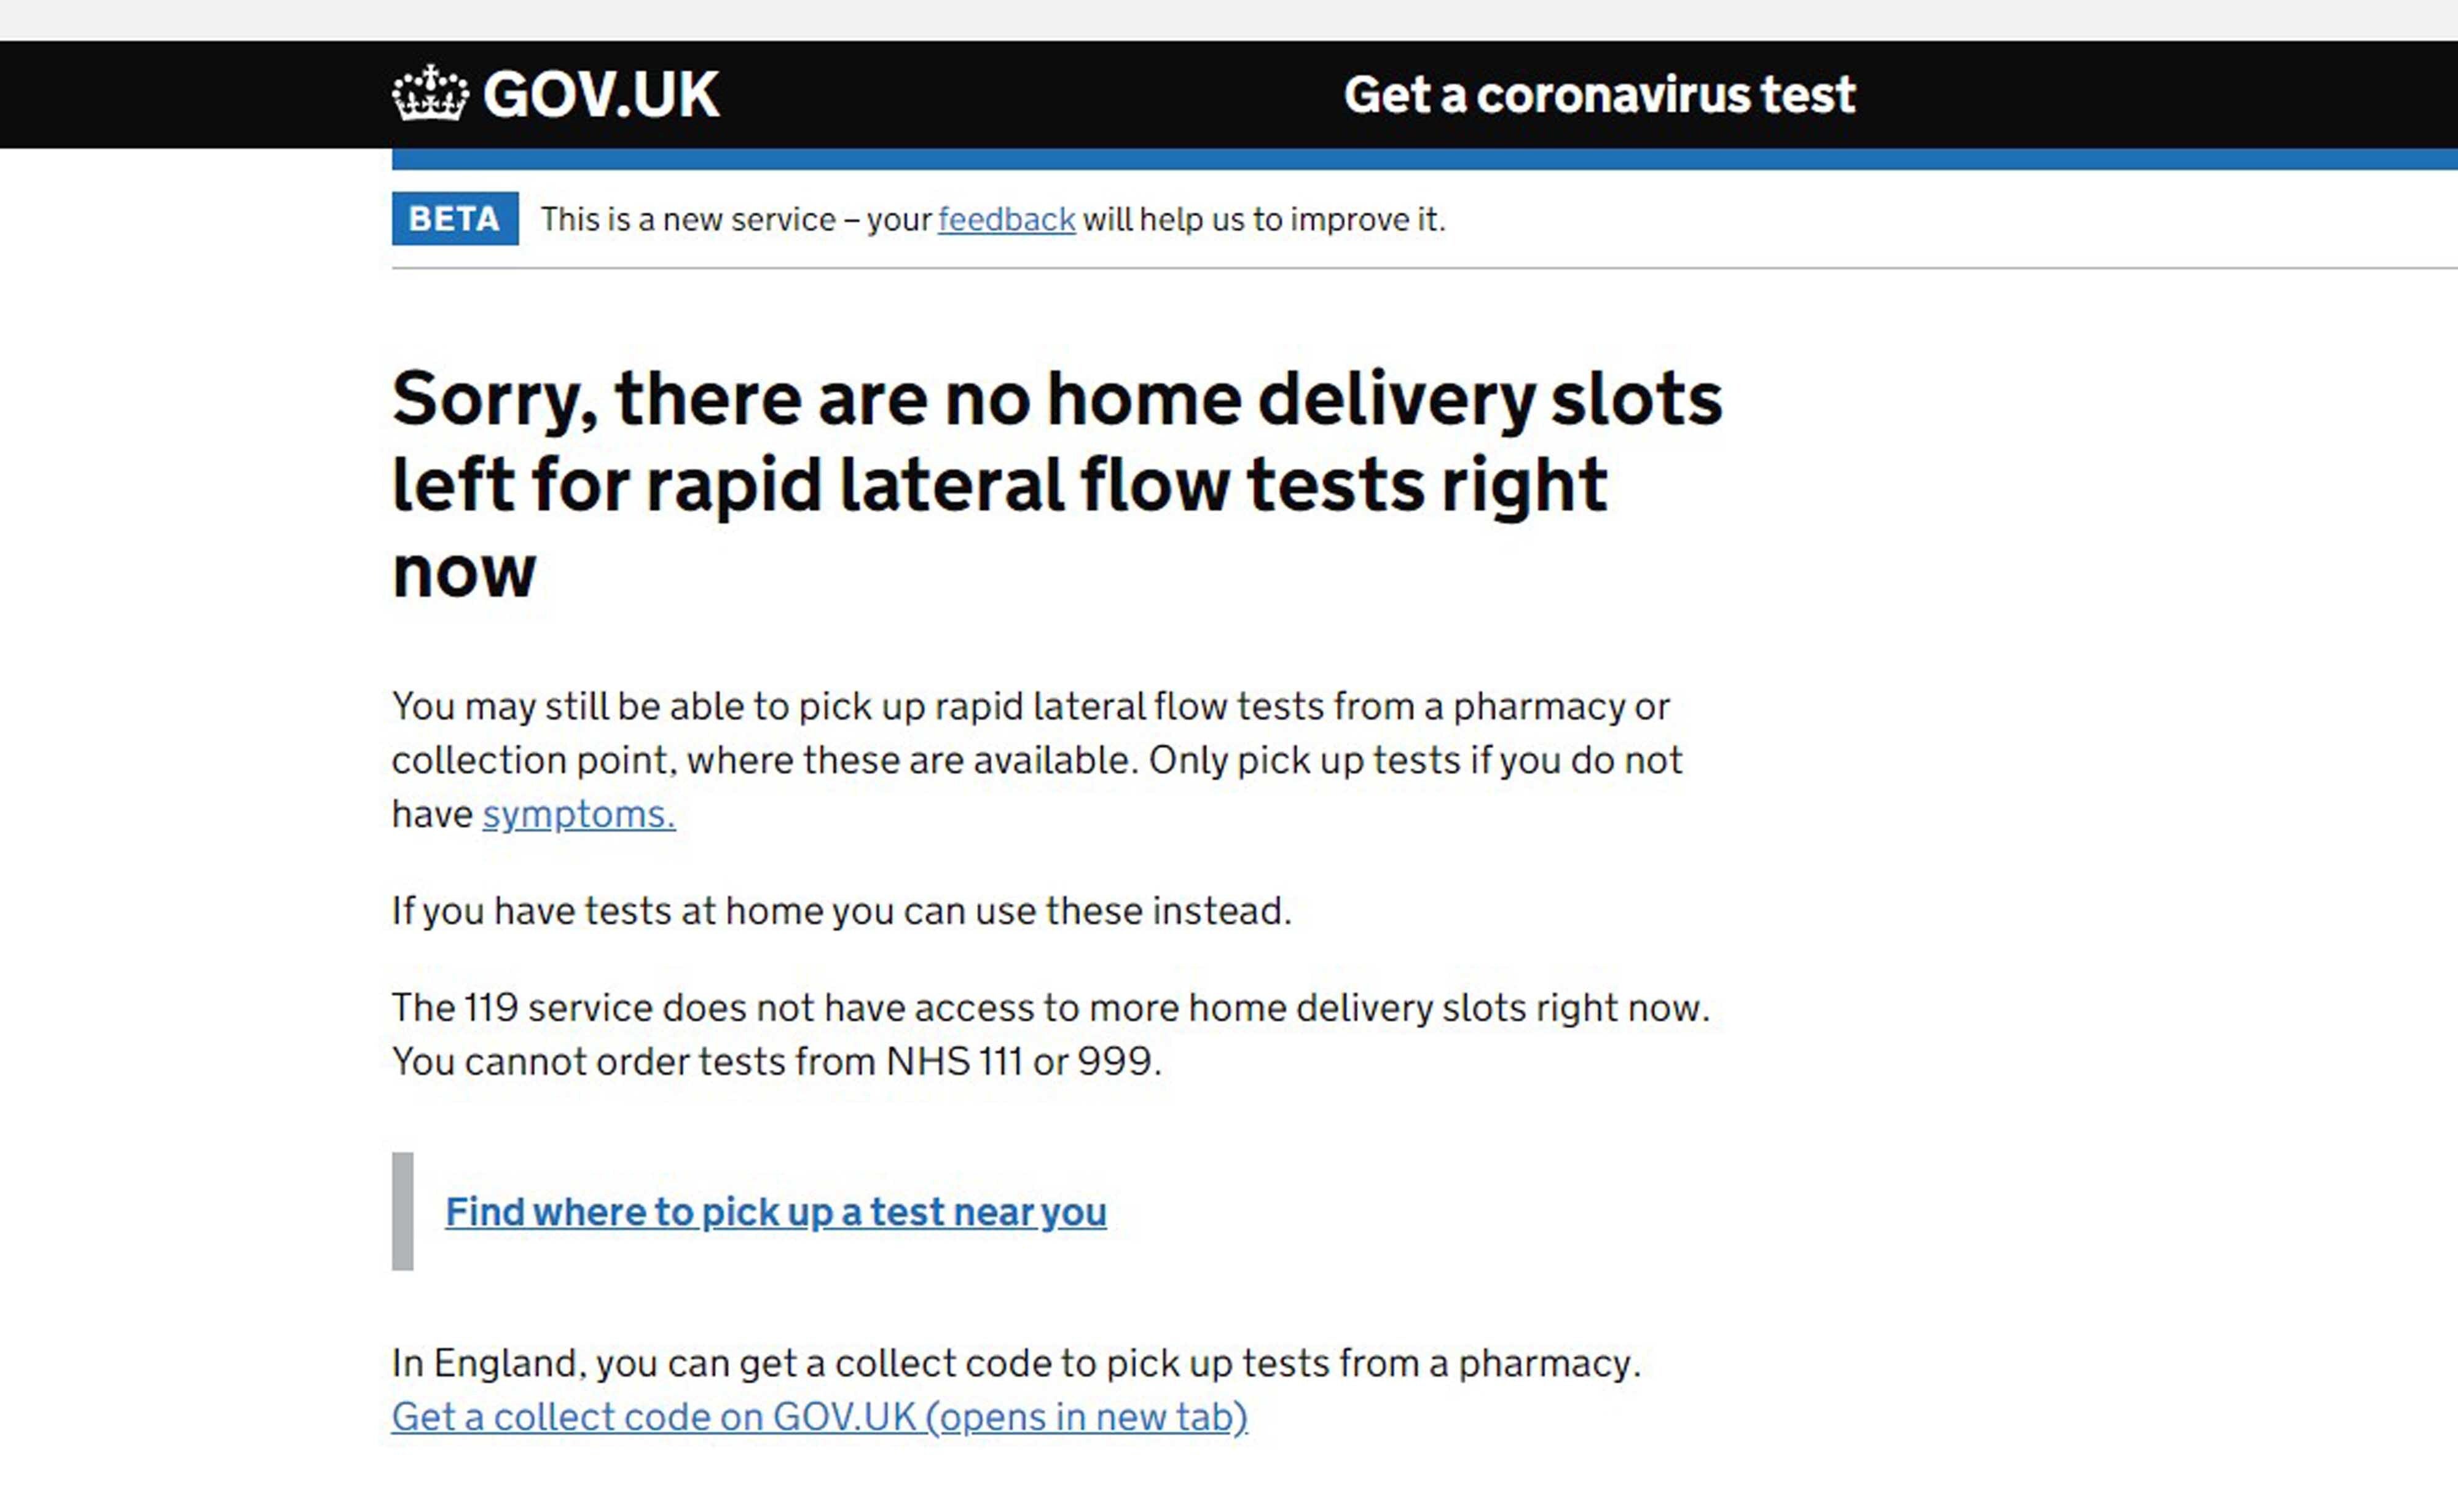 The UK Government website shows there are no home delivery slots for lateral flow tests available (PA)